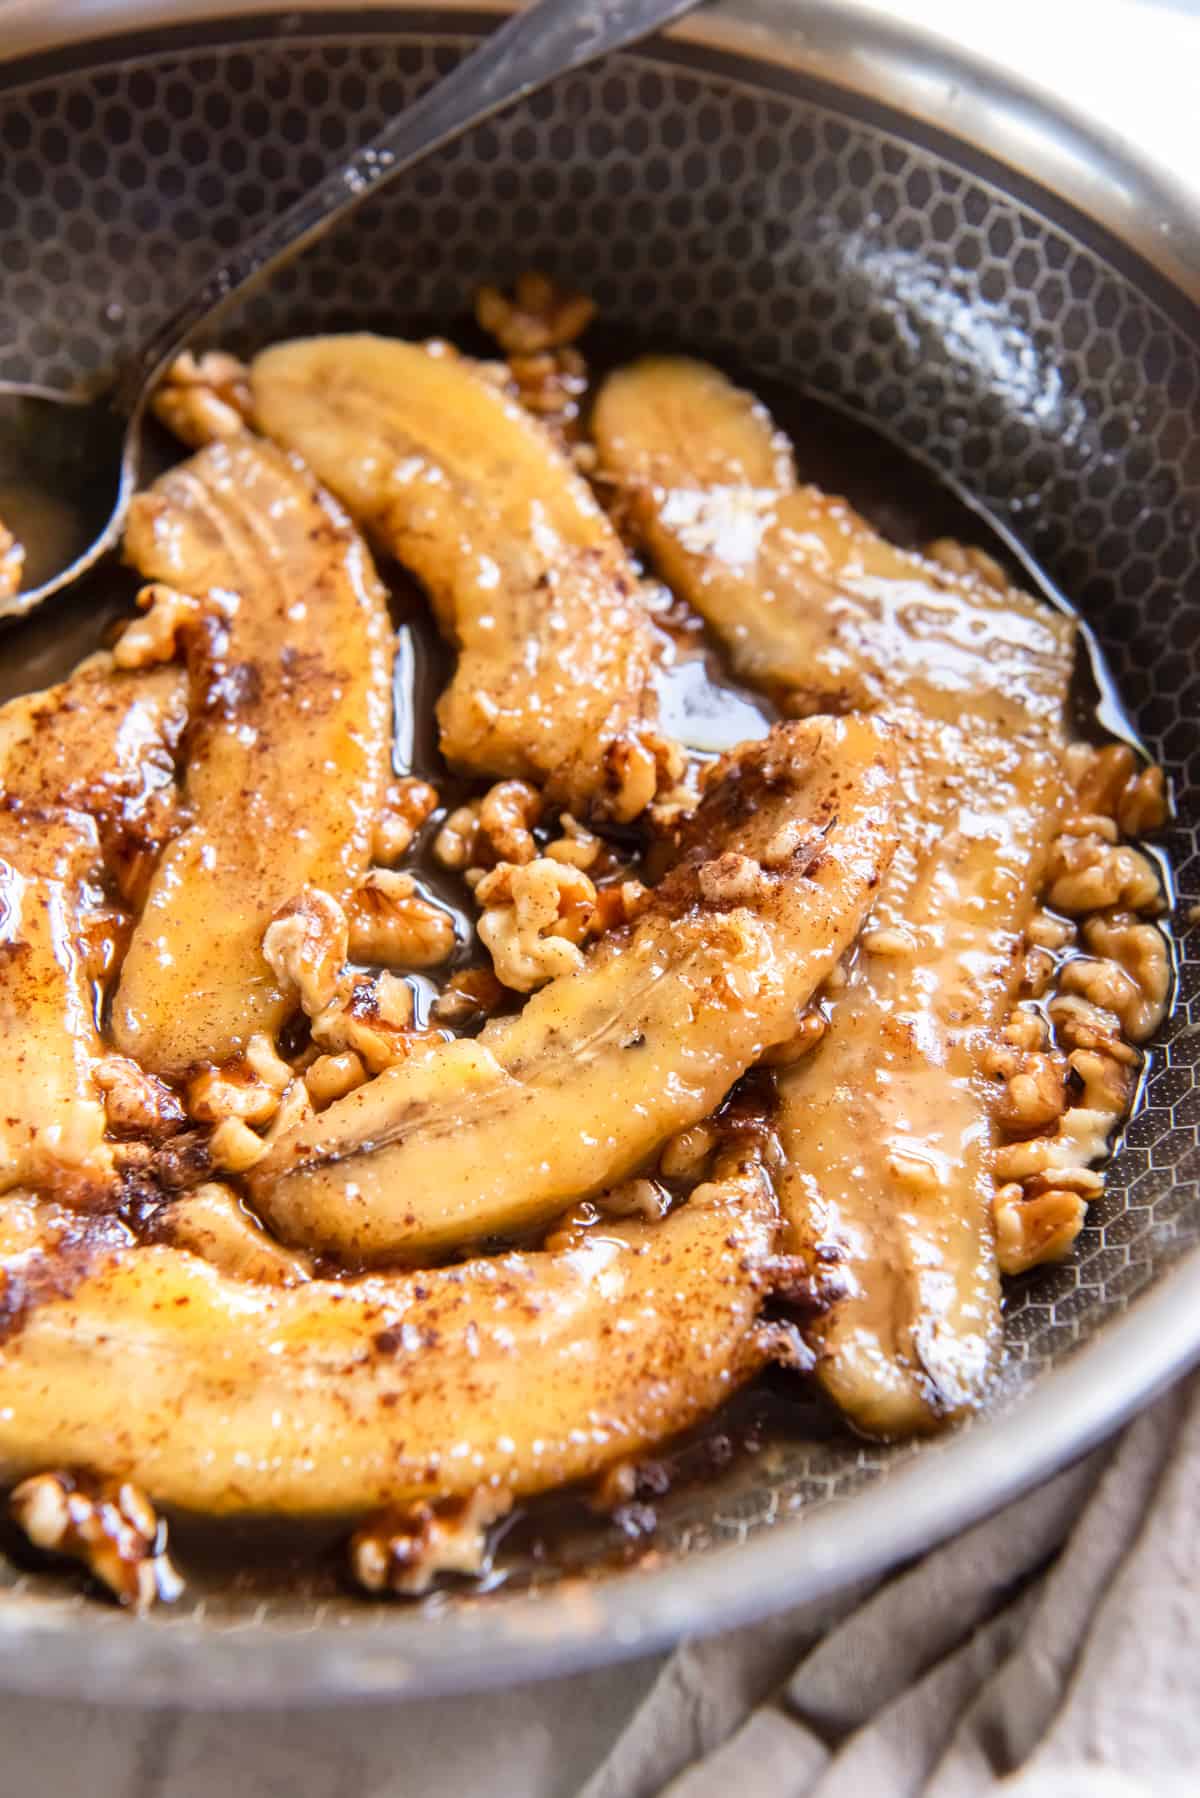 cooked bananas and pecans in a brown butter sauce